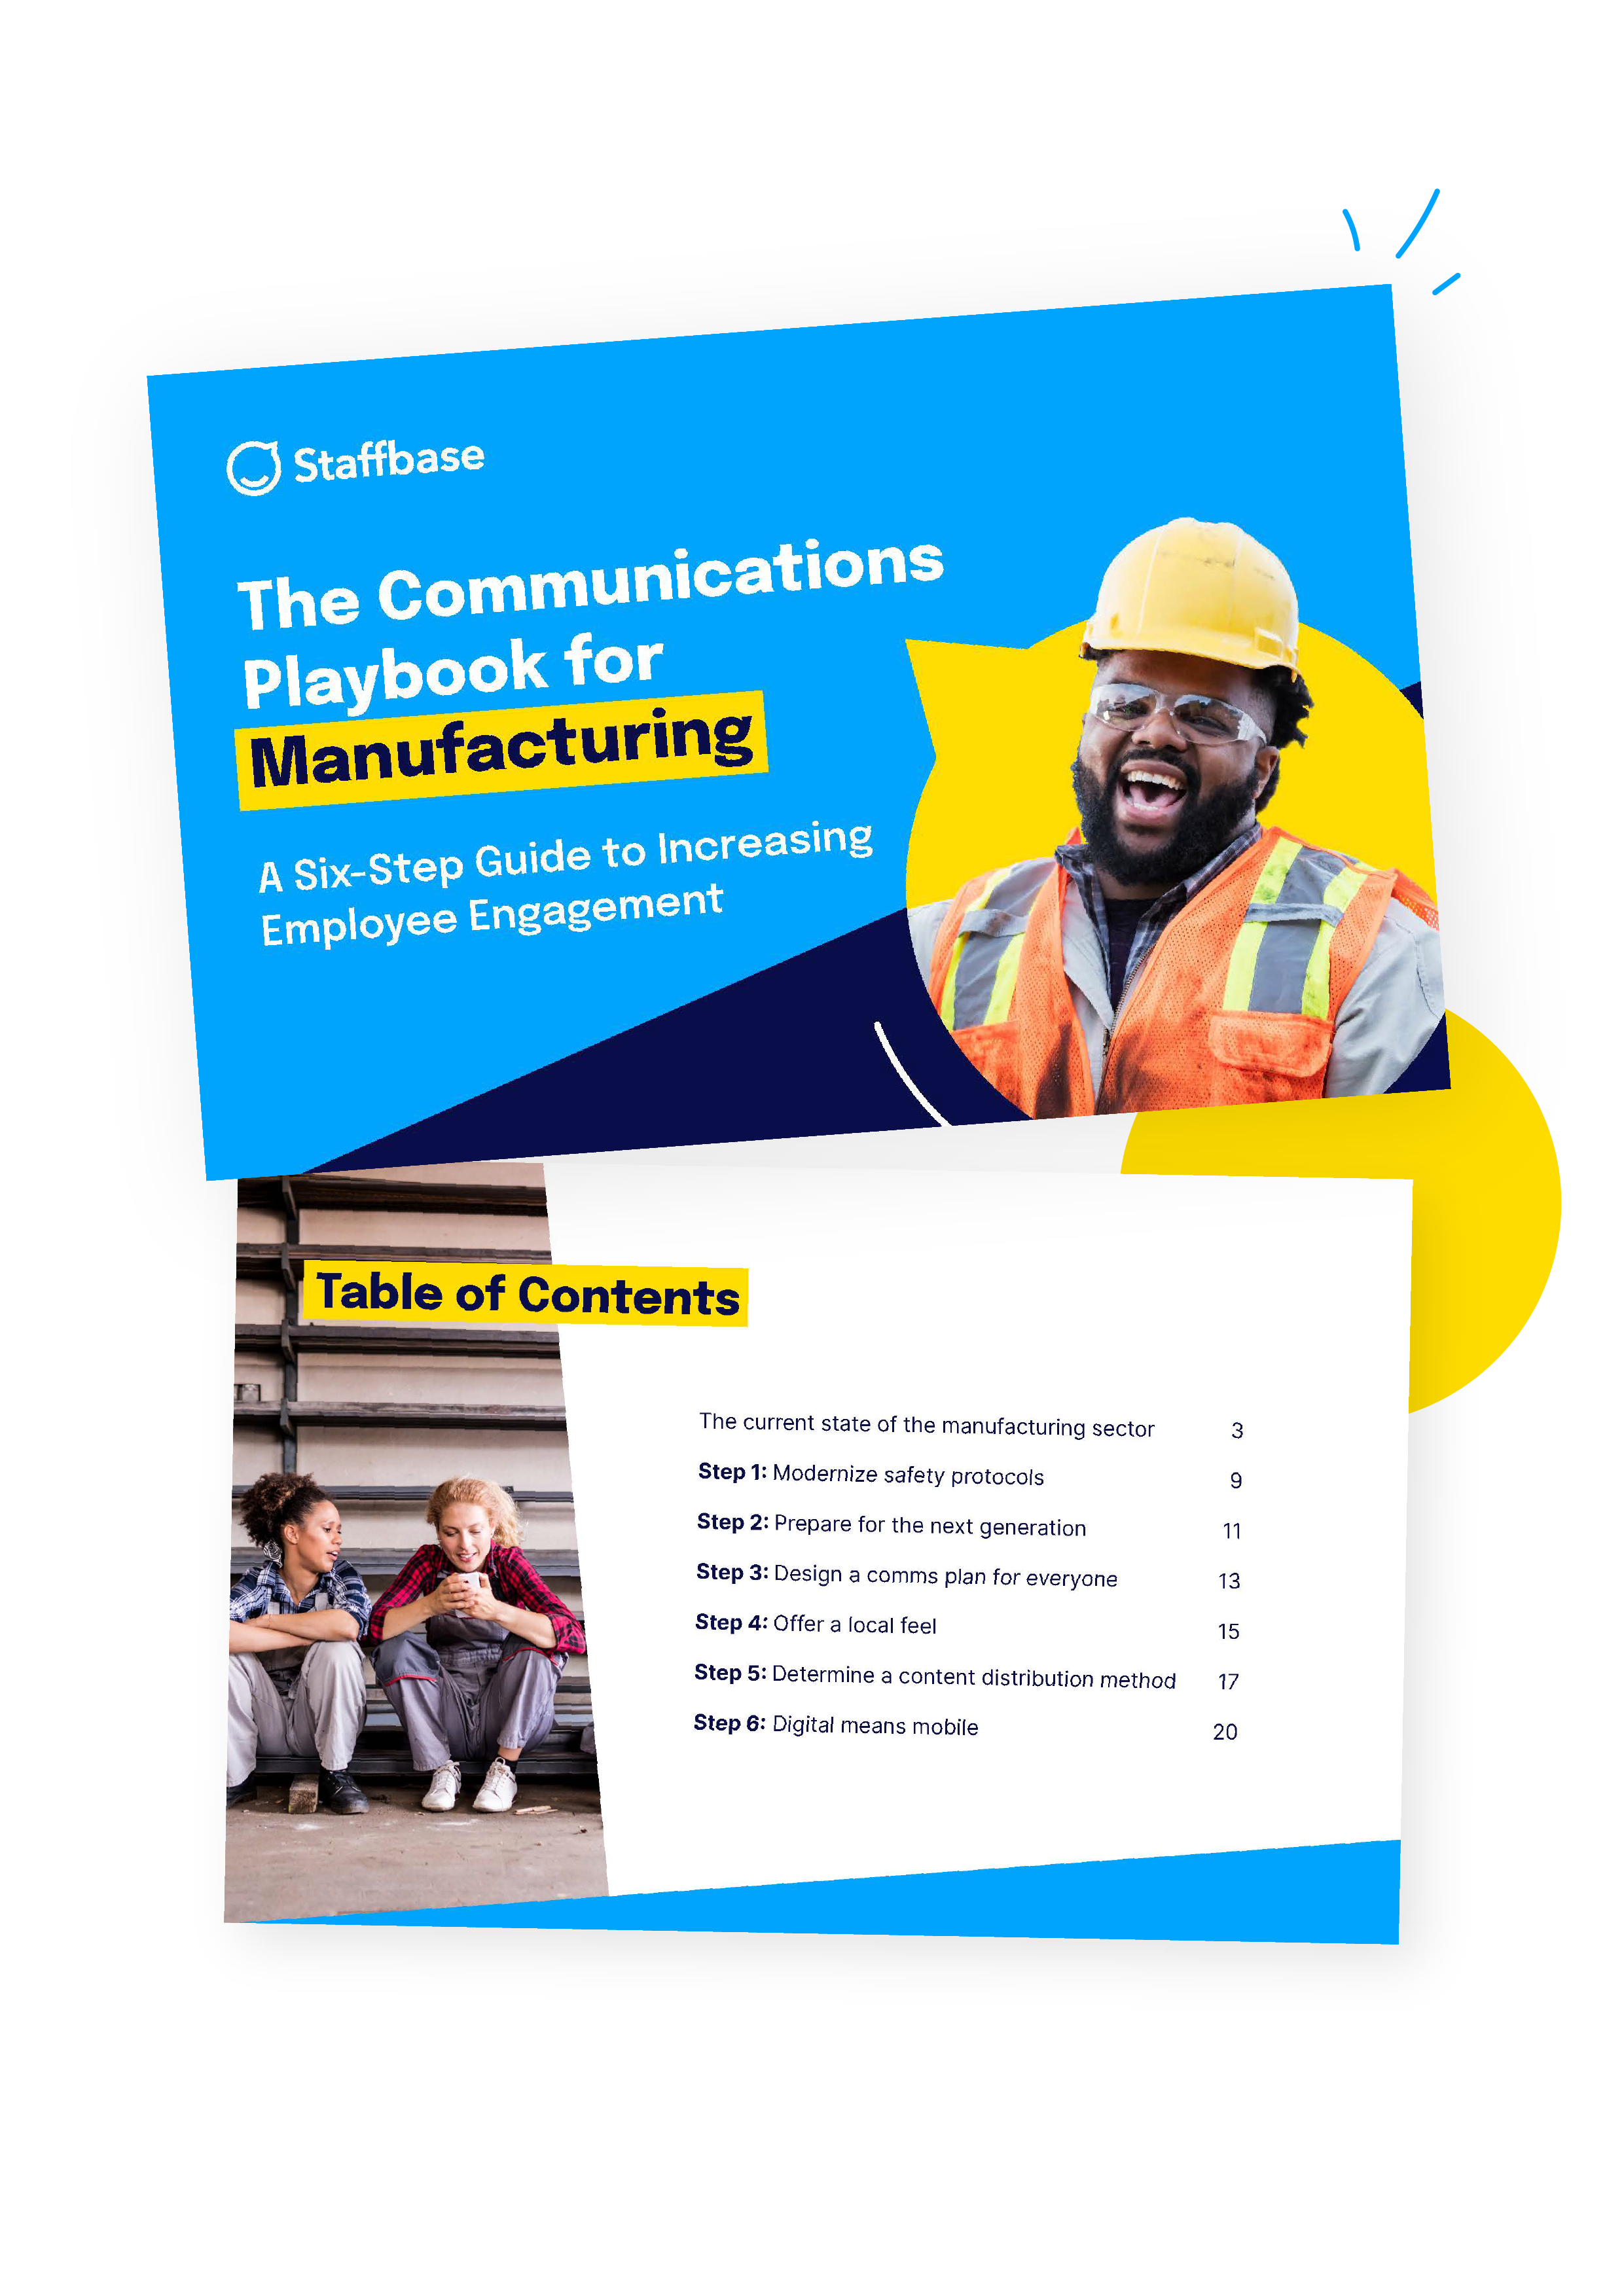 The Communications Playbook for Manufacturing